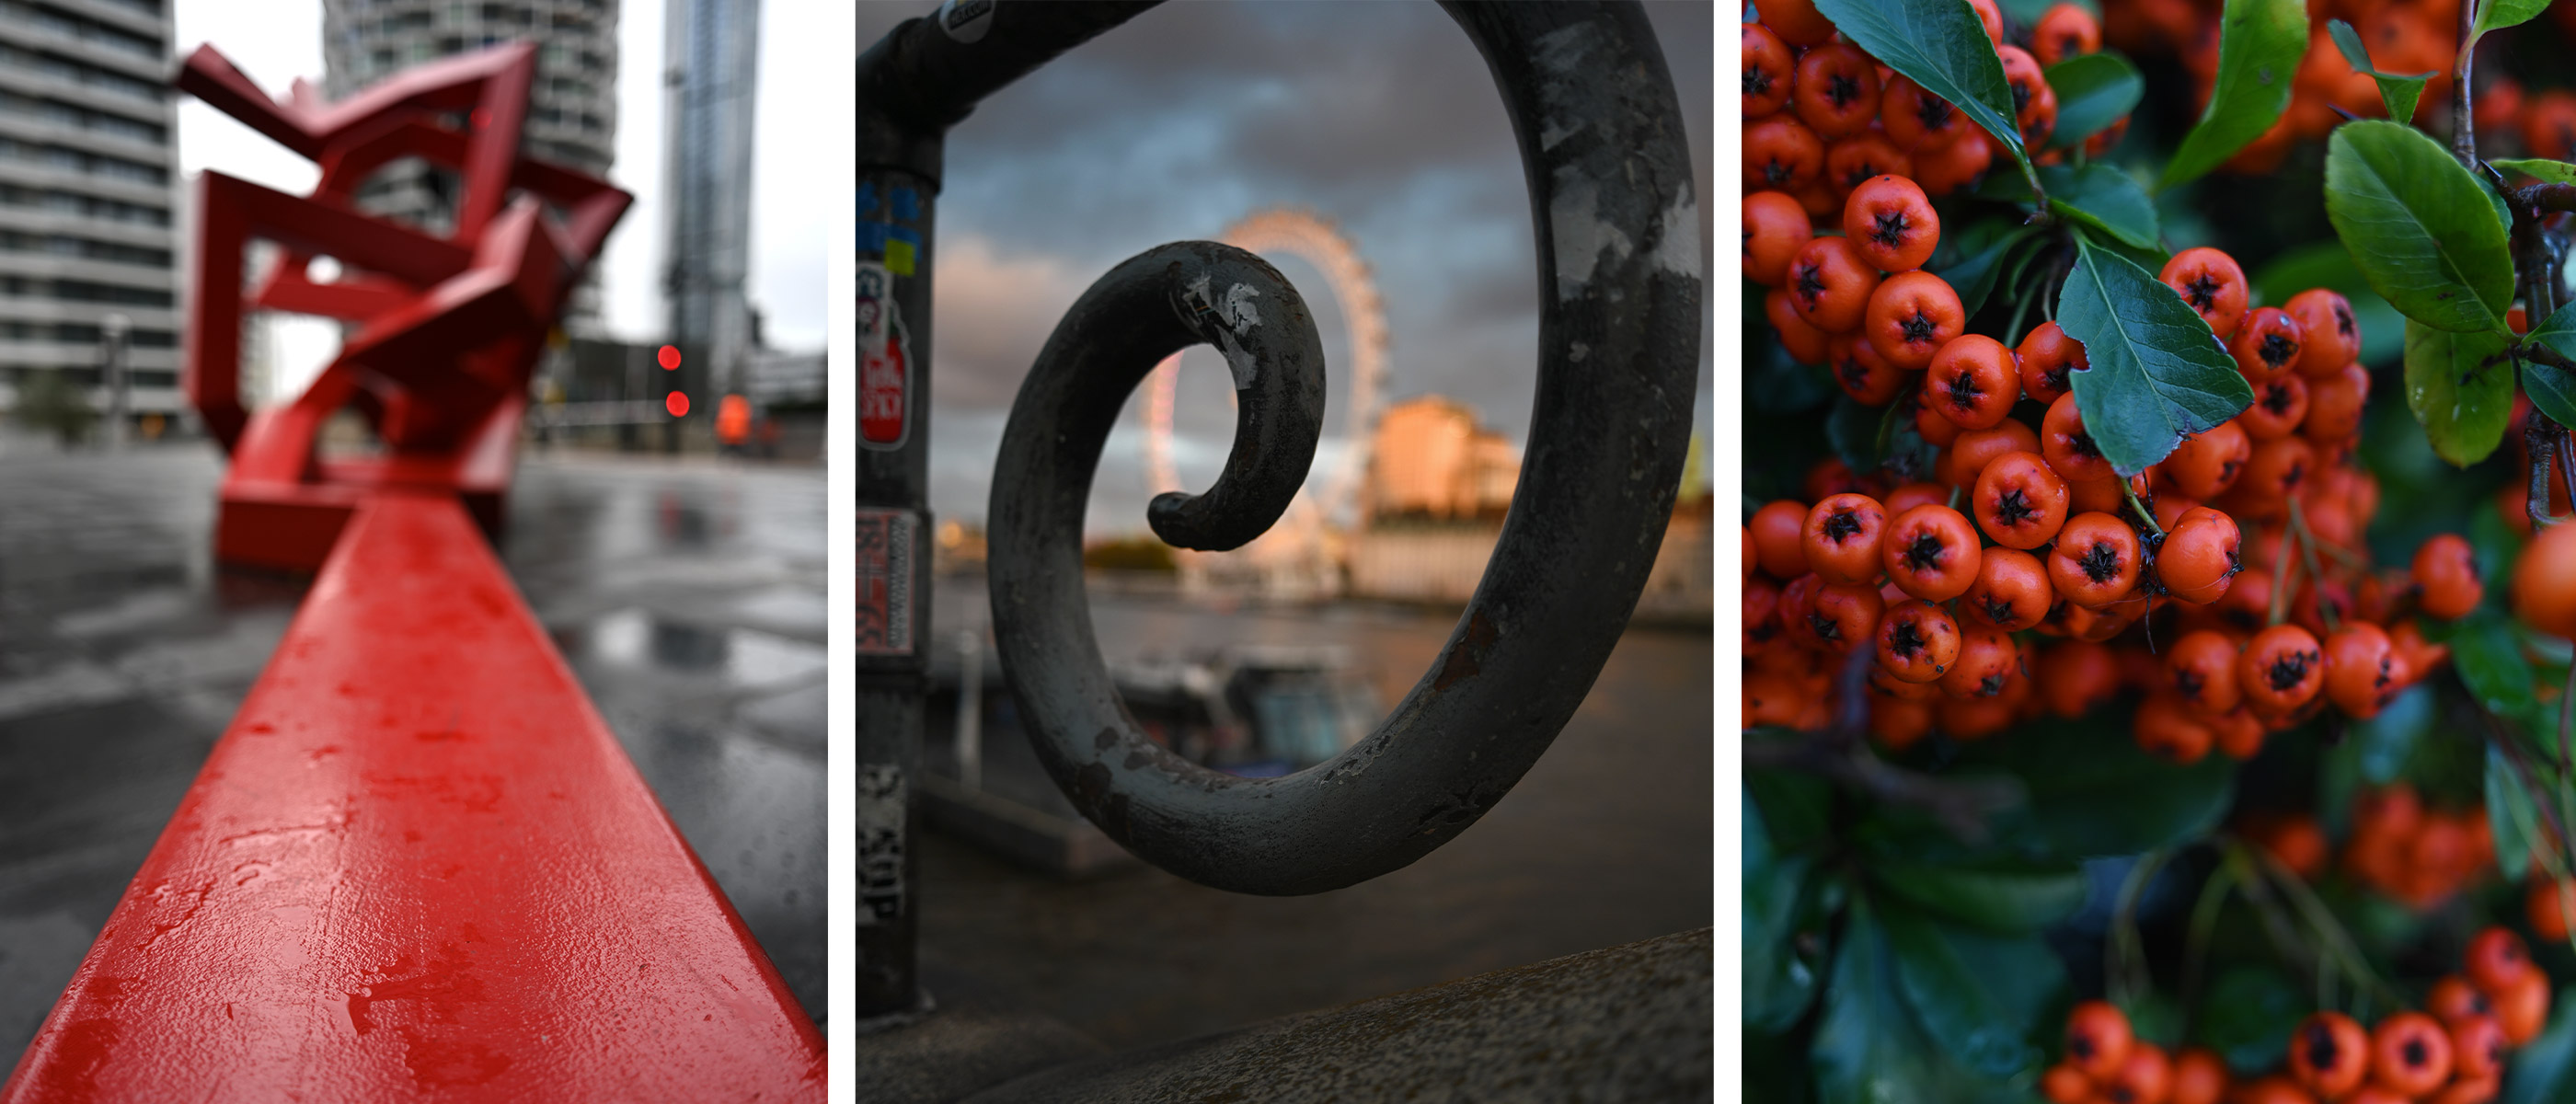 photo of a red sculpture, photo of a curved piece of metal and photo of berries on a tree, taken with the NIKKOR Z 26mm f/2.8